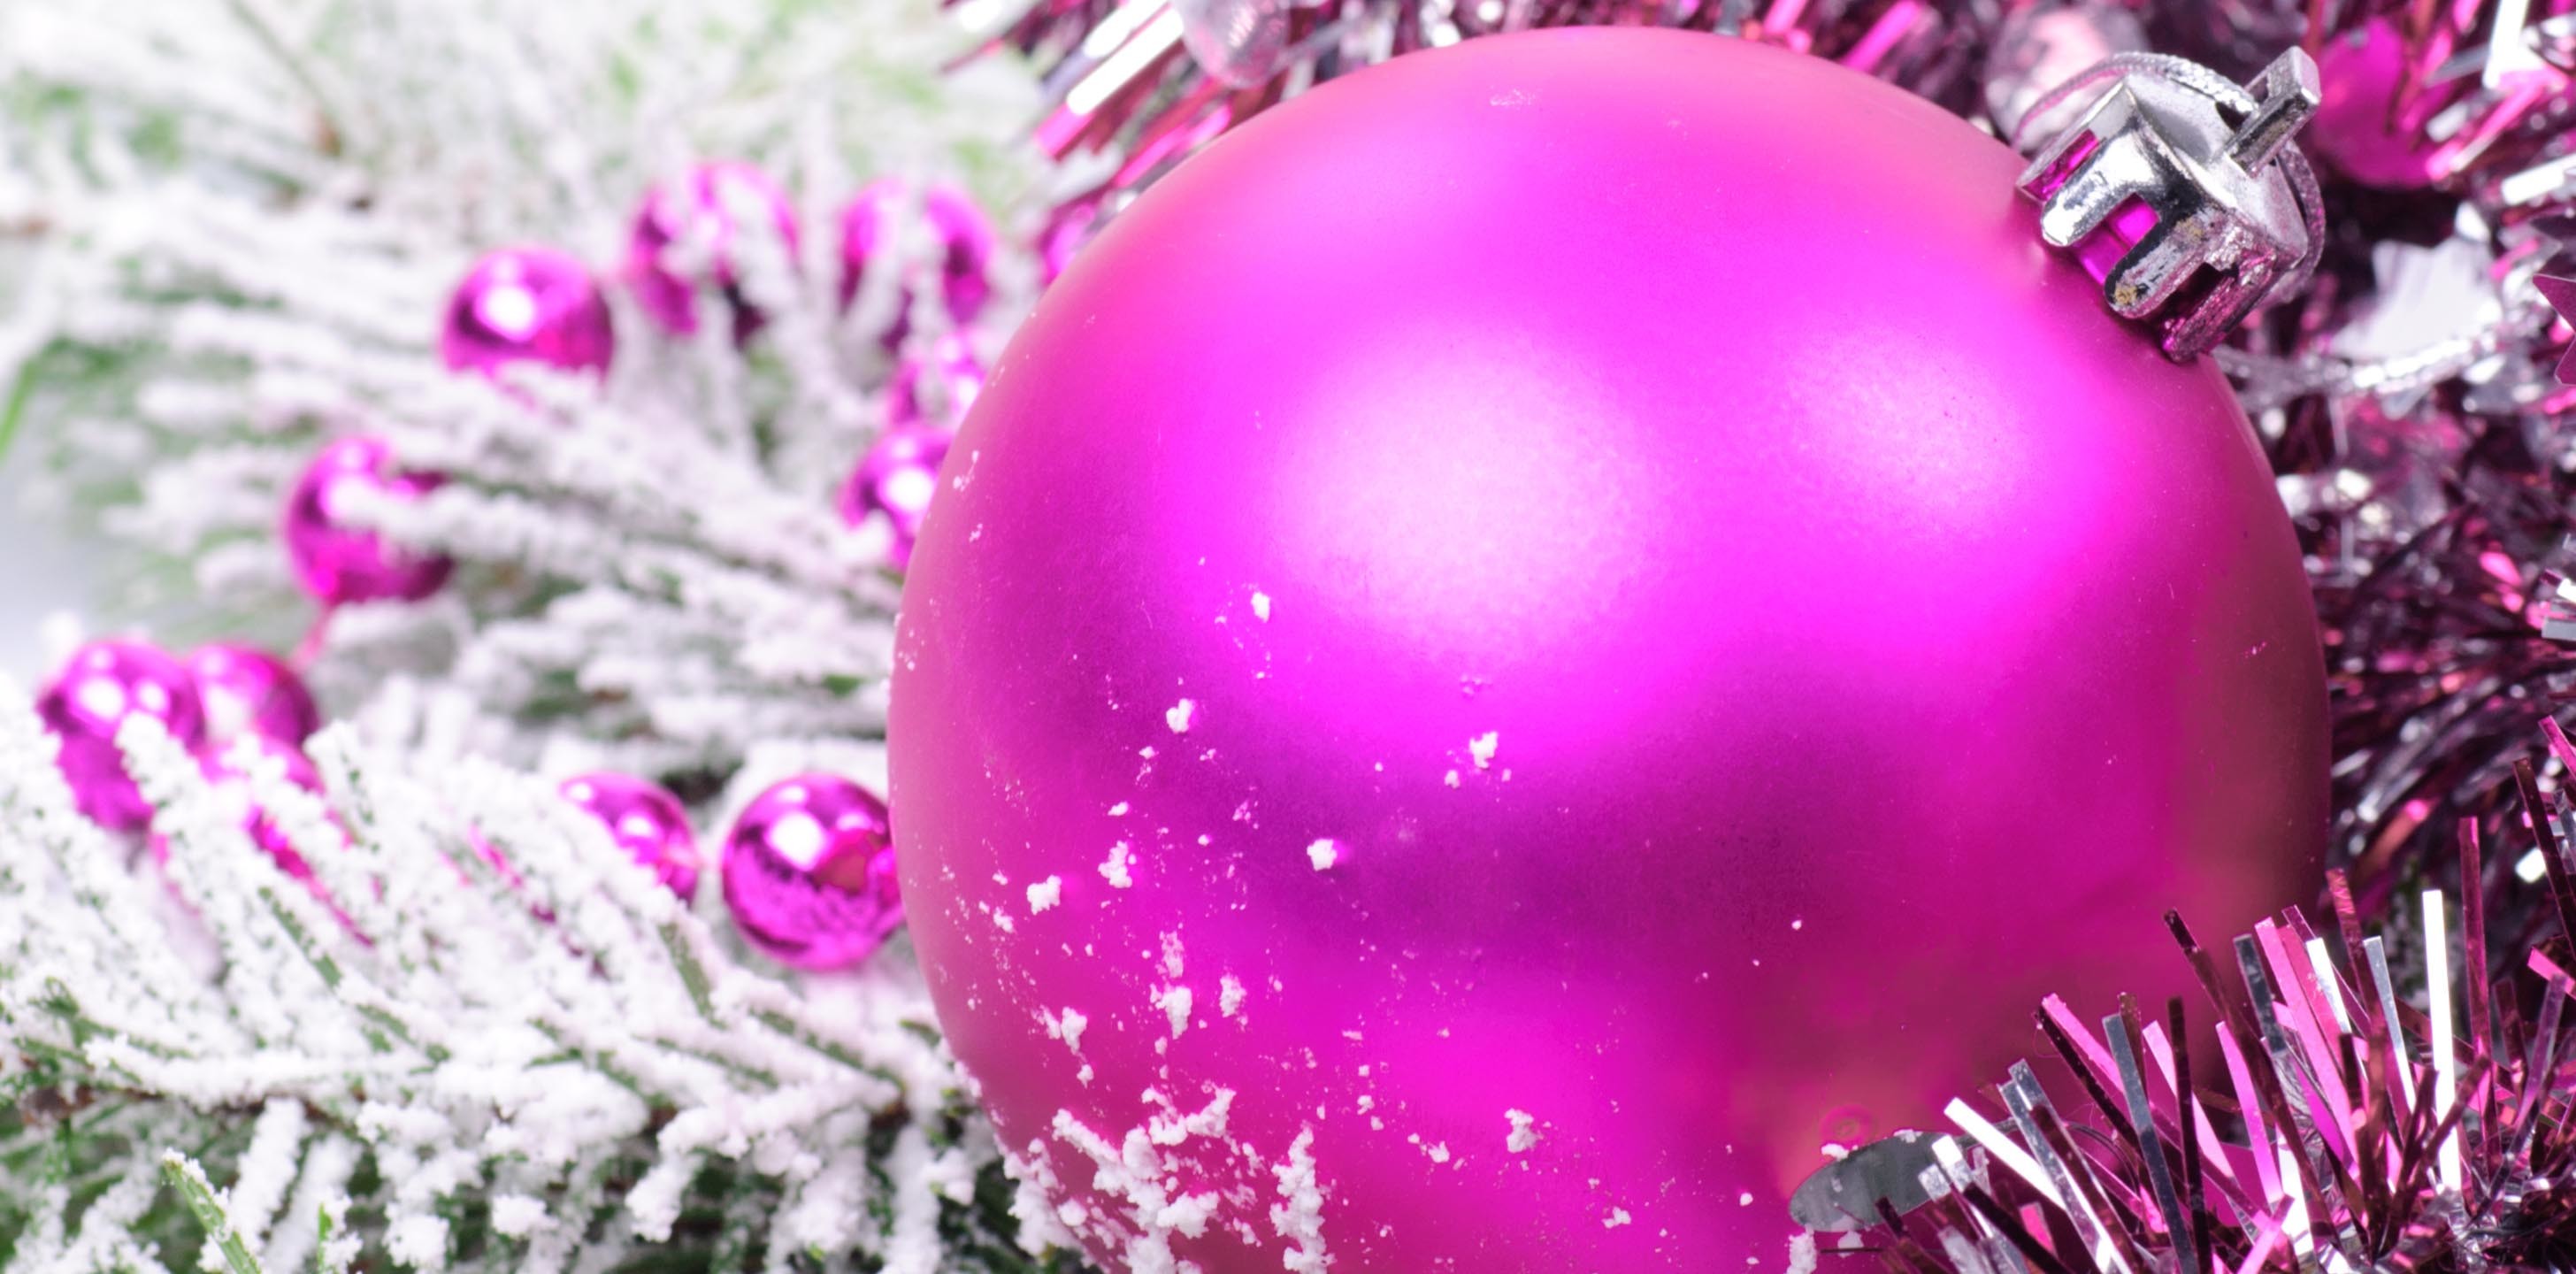 2912x1440 pink christmas wallpaper background - BinFind Search Engine